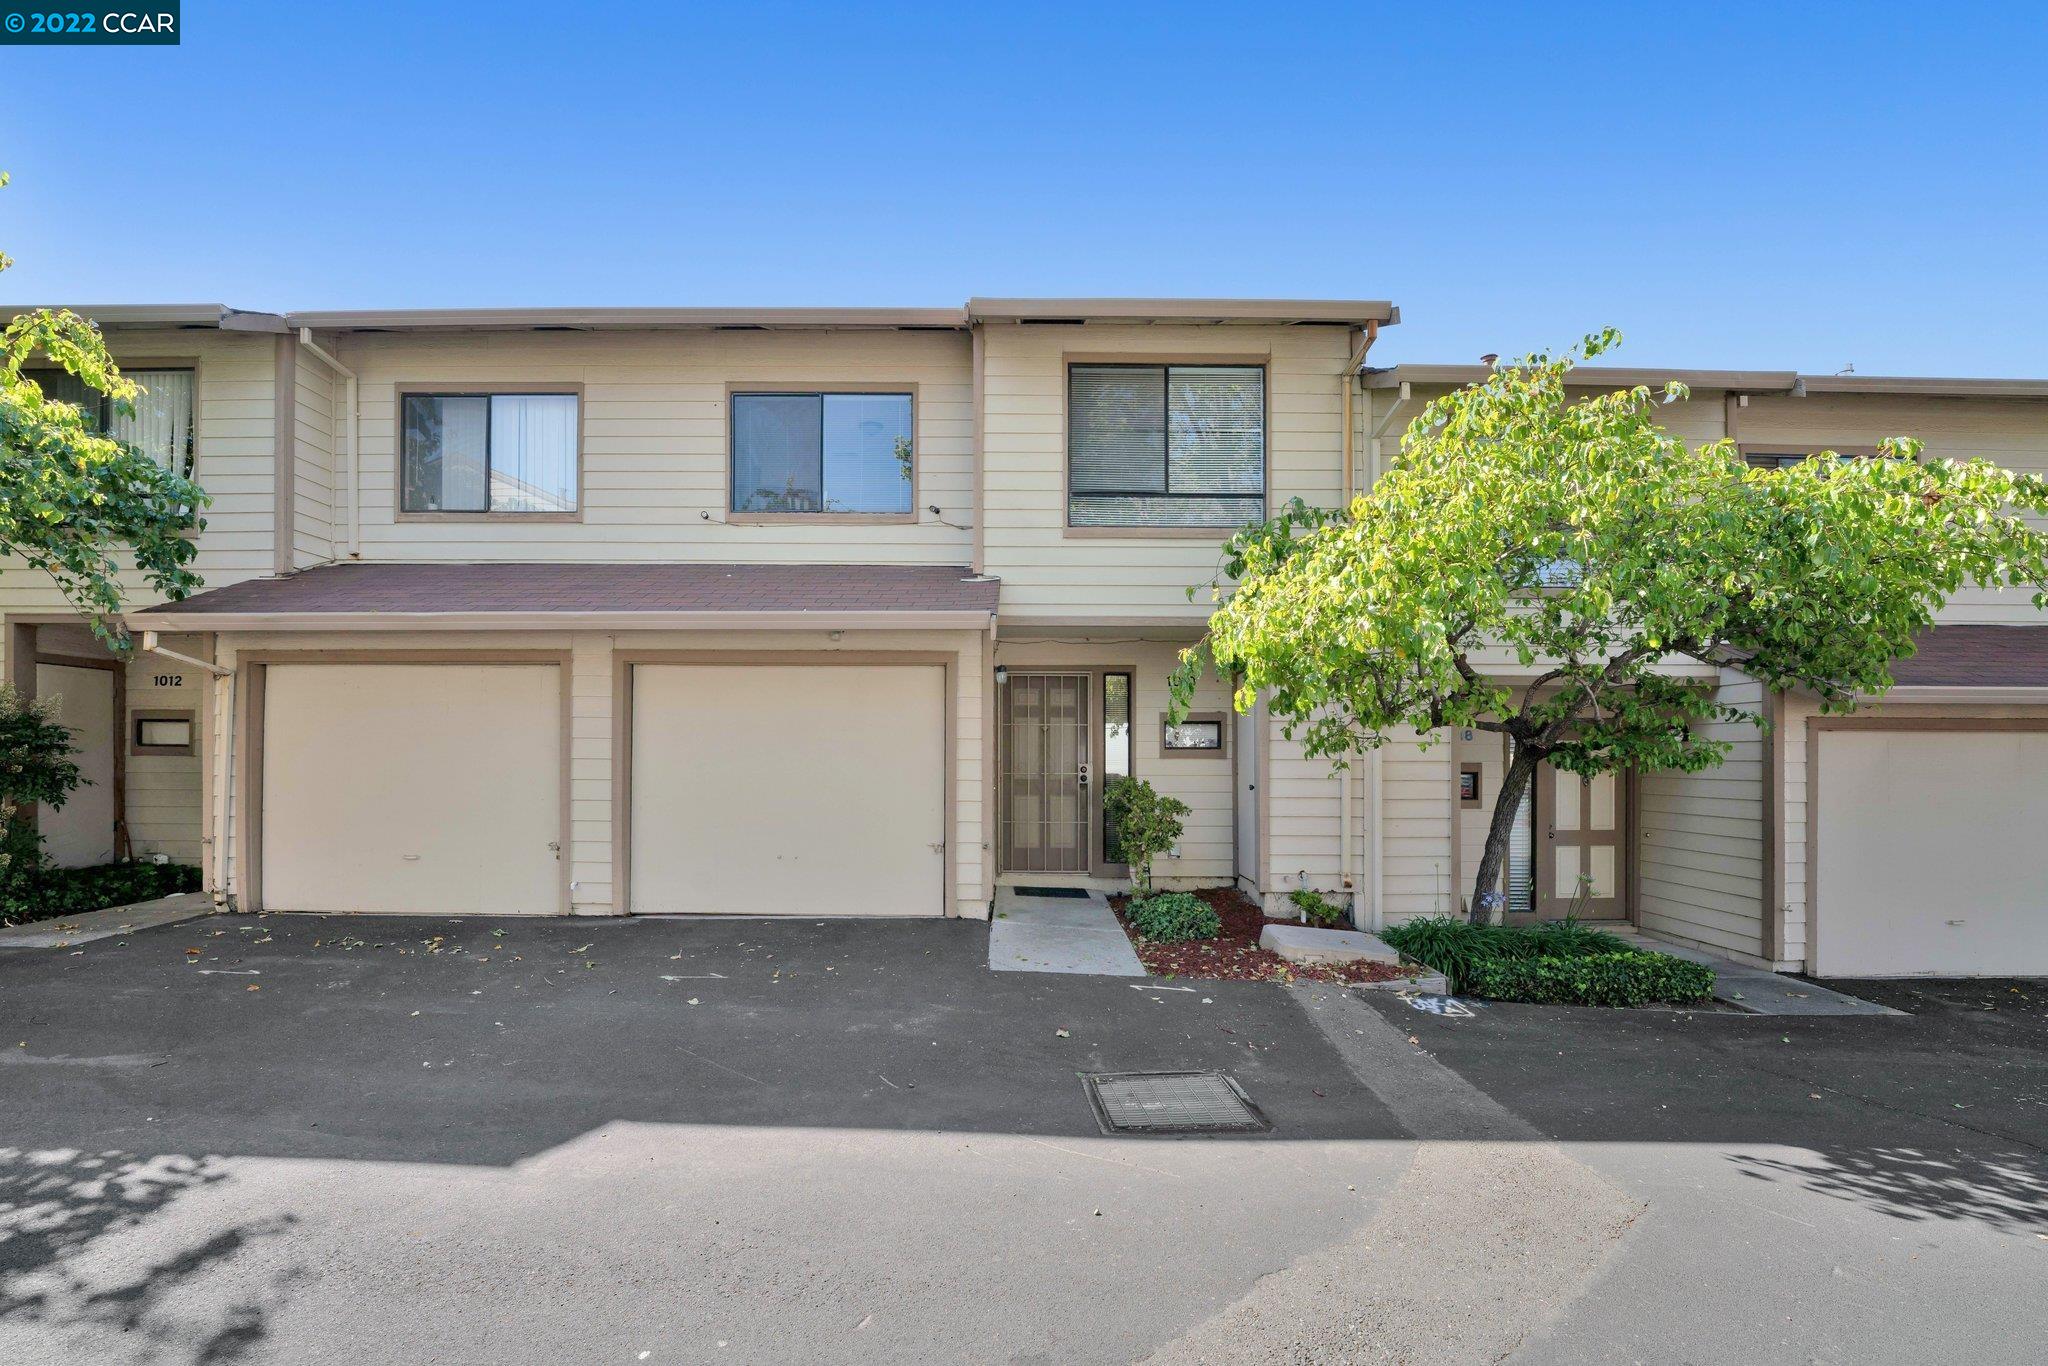 Gated Community , family friendly, swimming pool, spa and BBQ area for outdoor life. Town home style condo, move in ready. upgrade kitchen, updated bathrooms. Convenience location, easy access to highway 80, library, stores, and shopping mall, etc. Open house 06/11/22. 1pm to 4pm. Saturday. Open House 06/12/22. 1pm to 5pm. Sunday